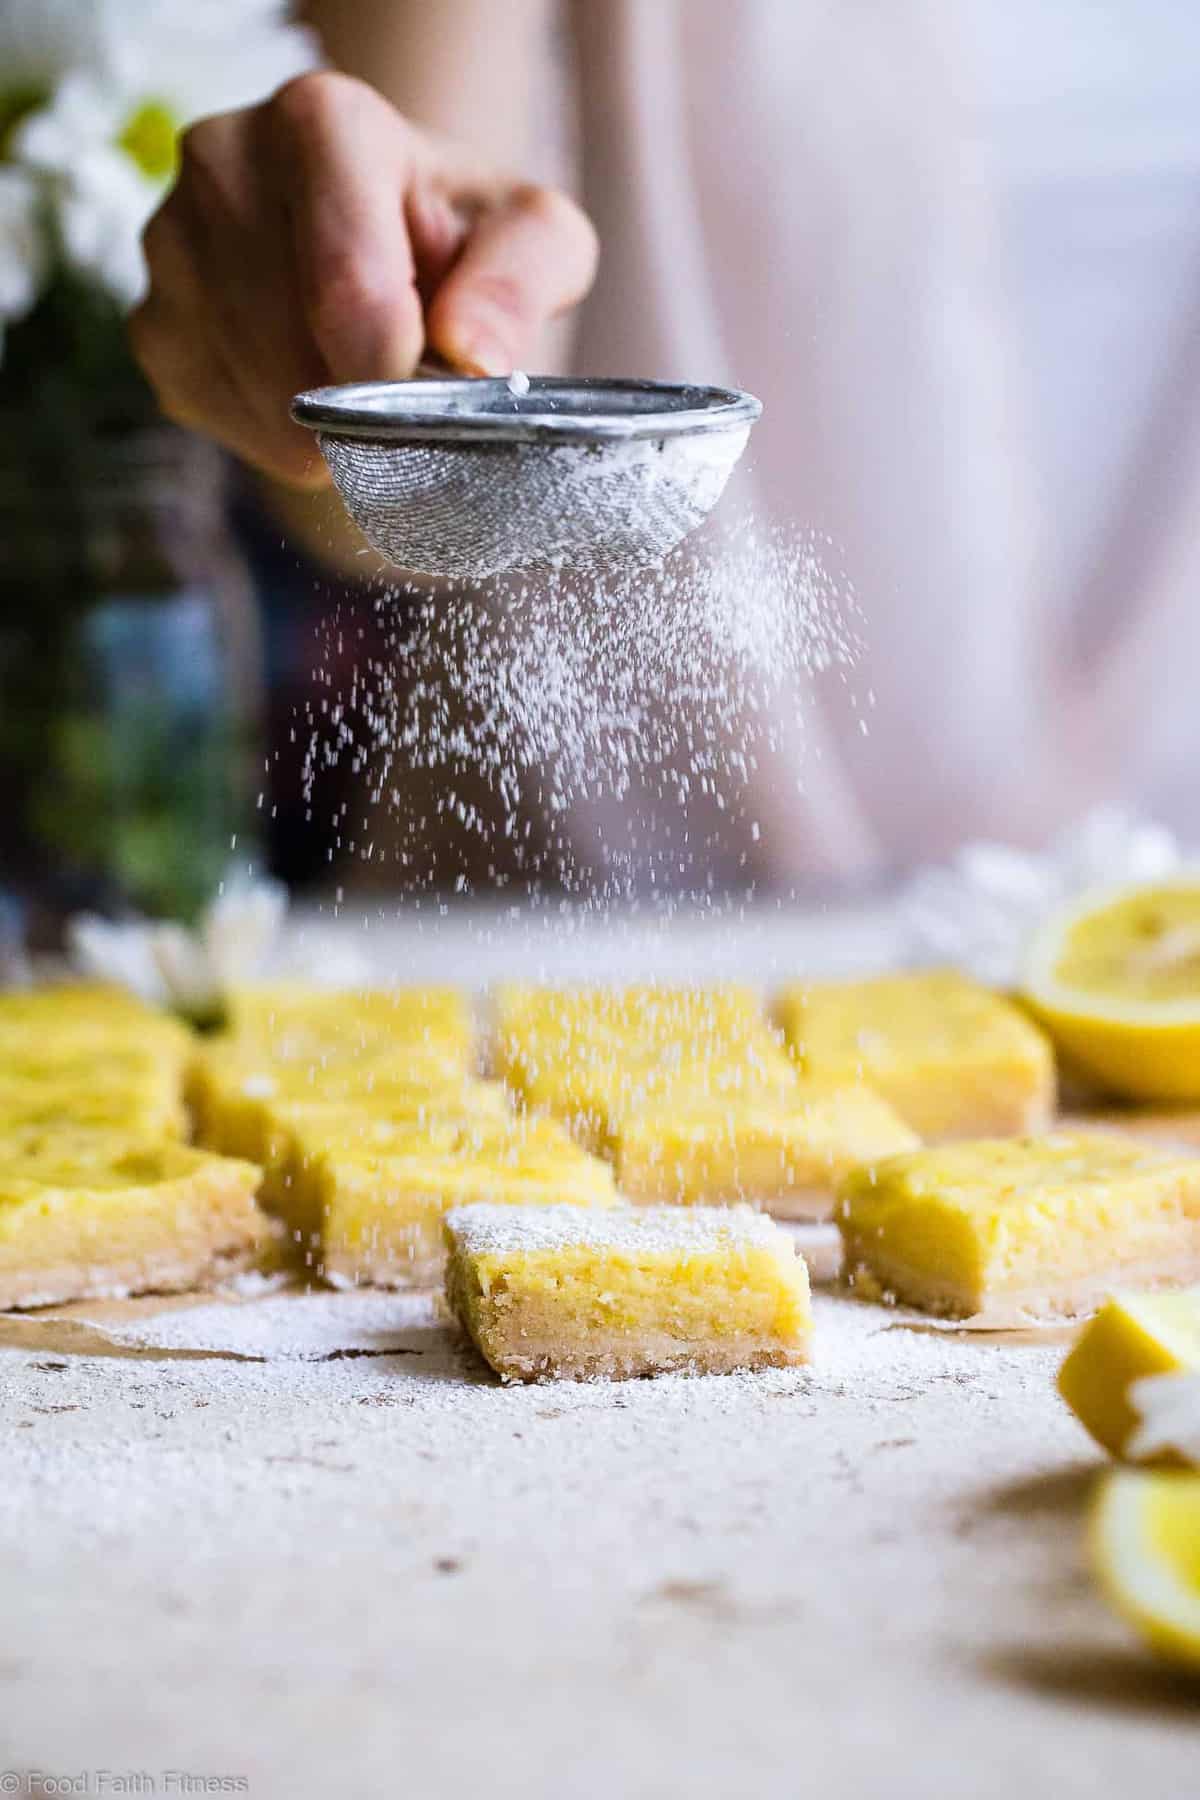 Sugar Free Keto Low Carb Lemon Bars - These easy, gluten free lemon bars are only 5 ingredients and SO delicious! You will never believe they are only 100 calories, low carb and sugar free! | #Foodfaithfitness | #Glutenfree #Lowcarb #keto #sugarfree #healthy